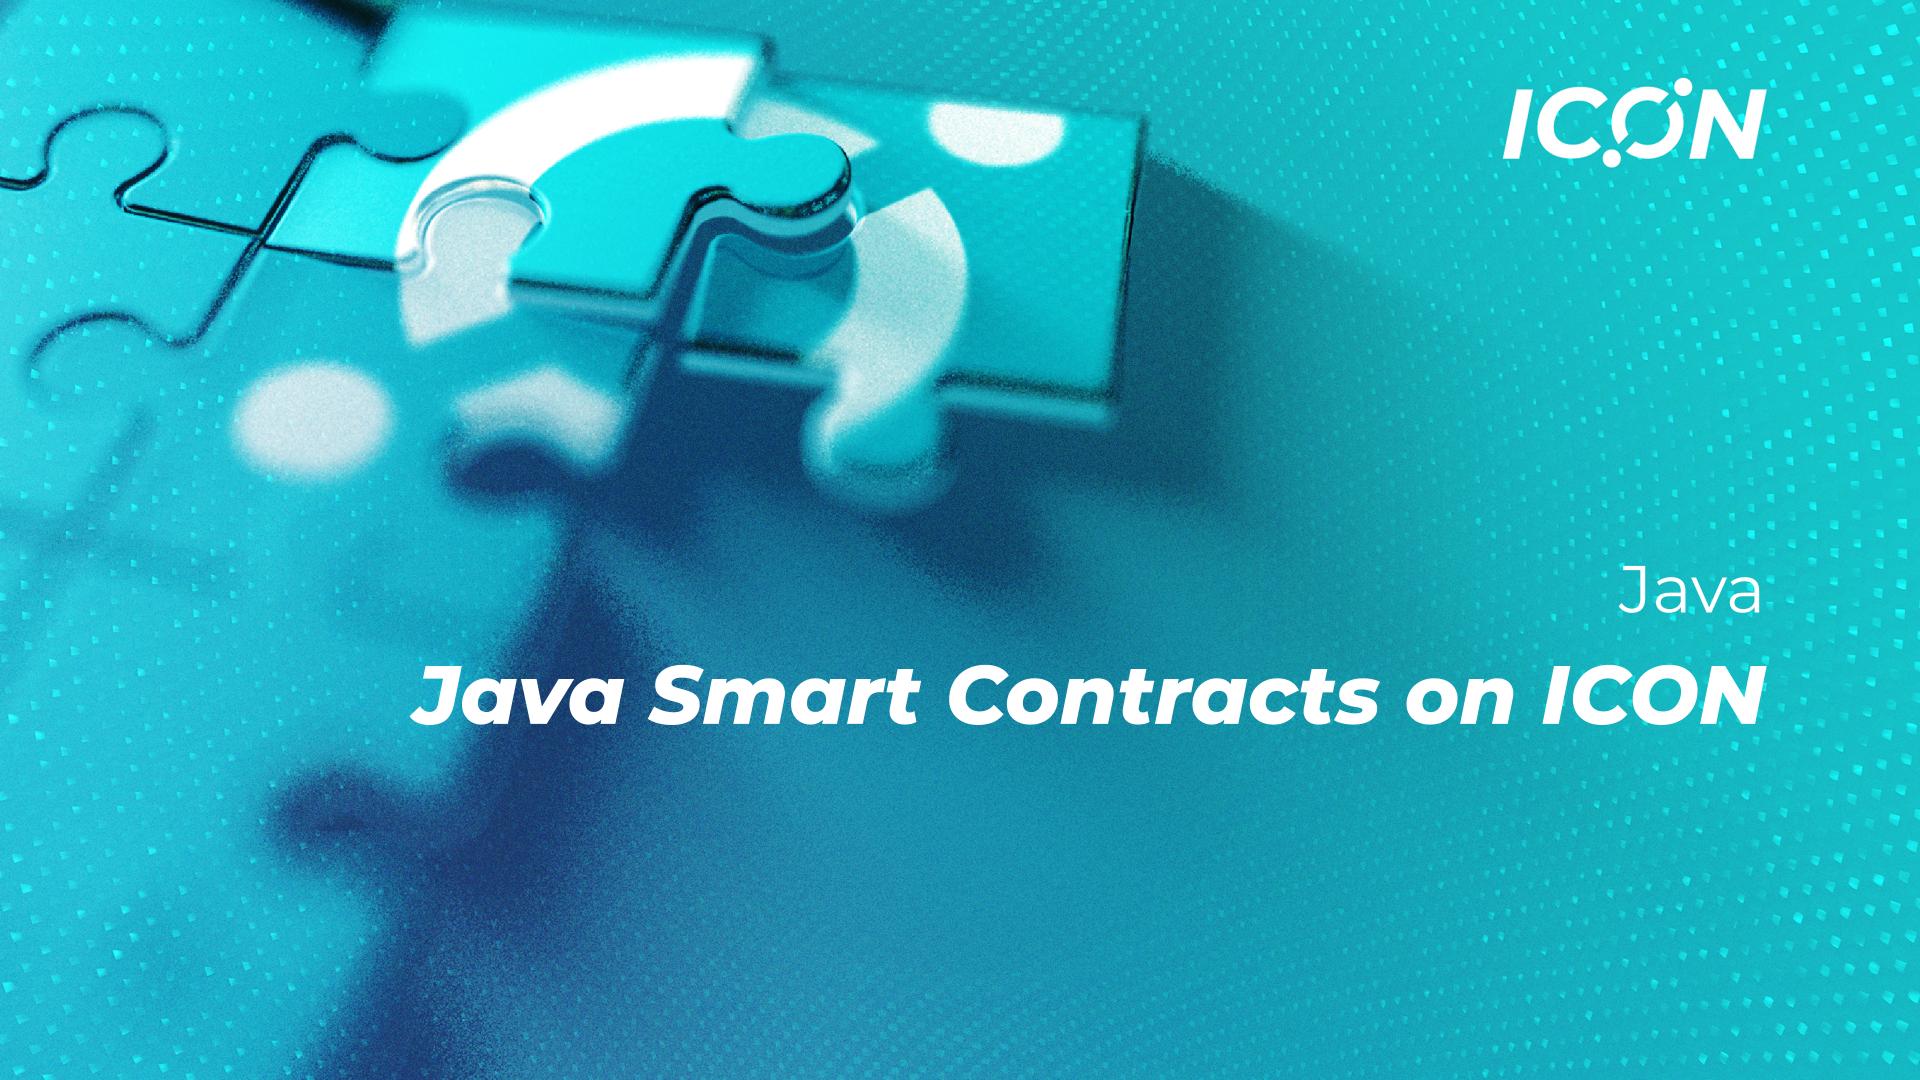 Java tutorial series part 2 deploying the smart contract and interacting with the smart contract onchain